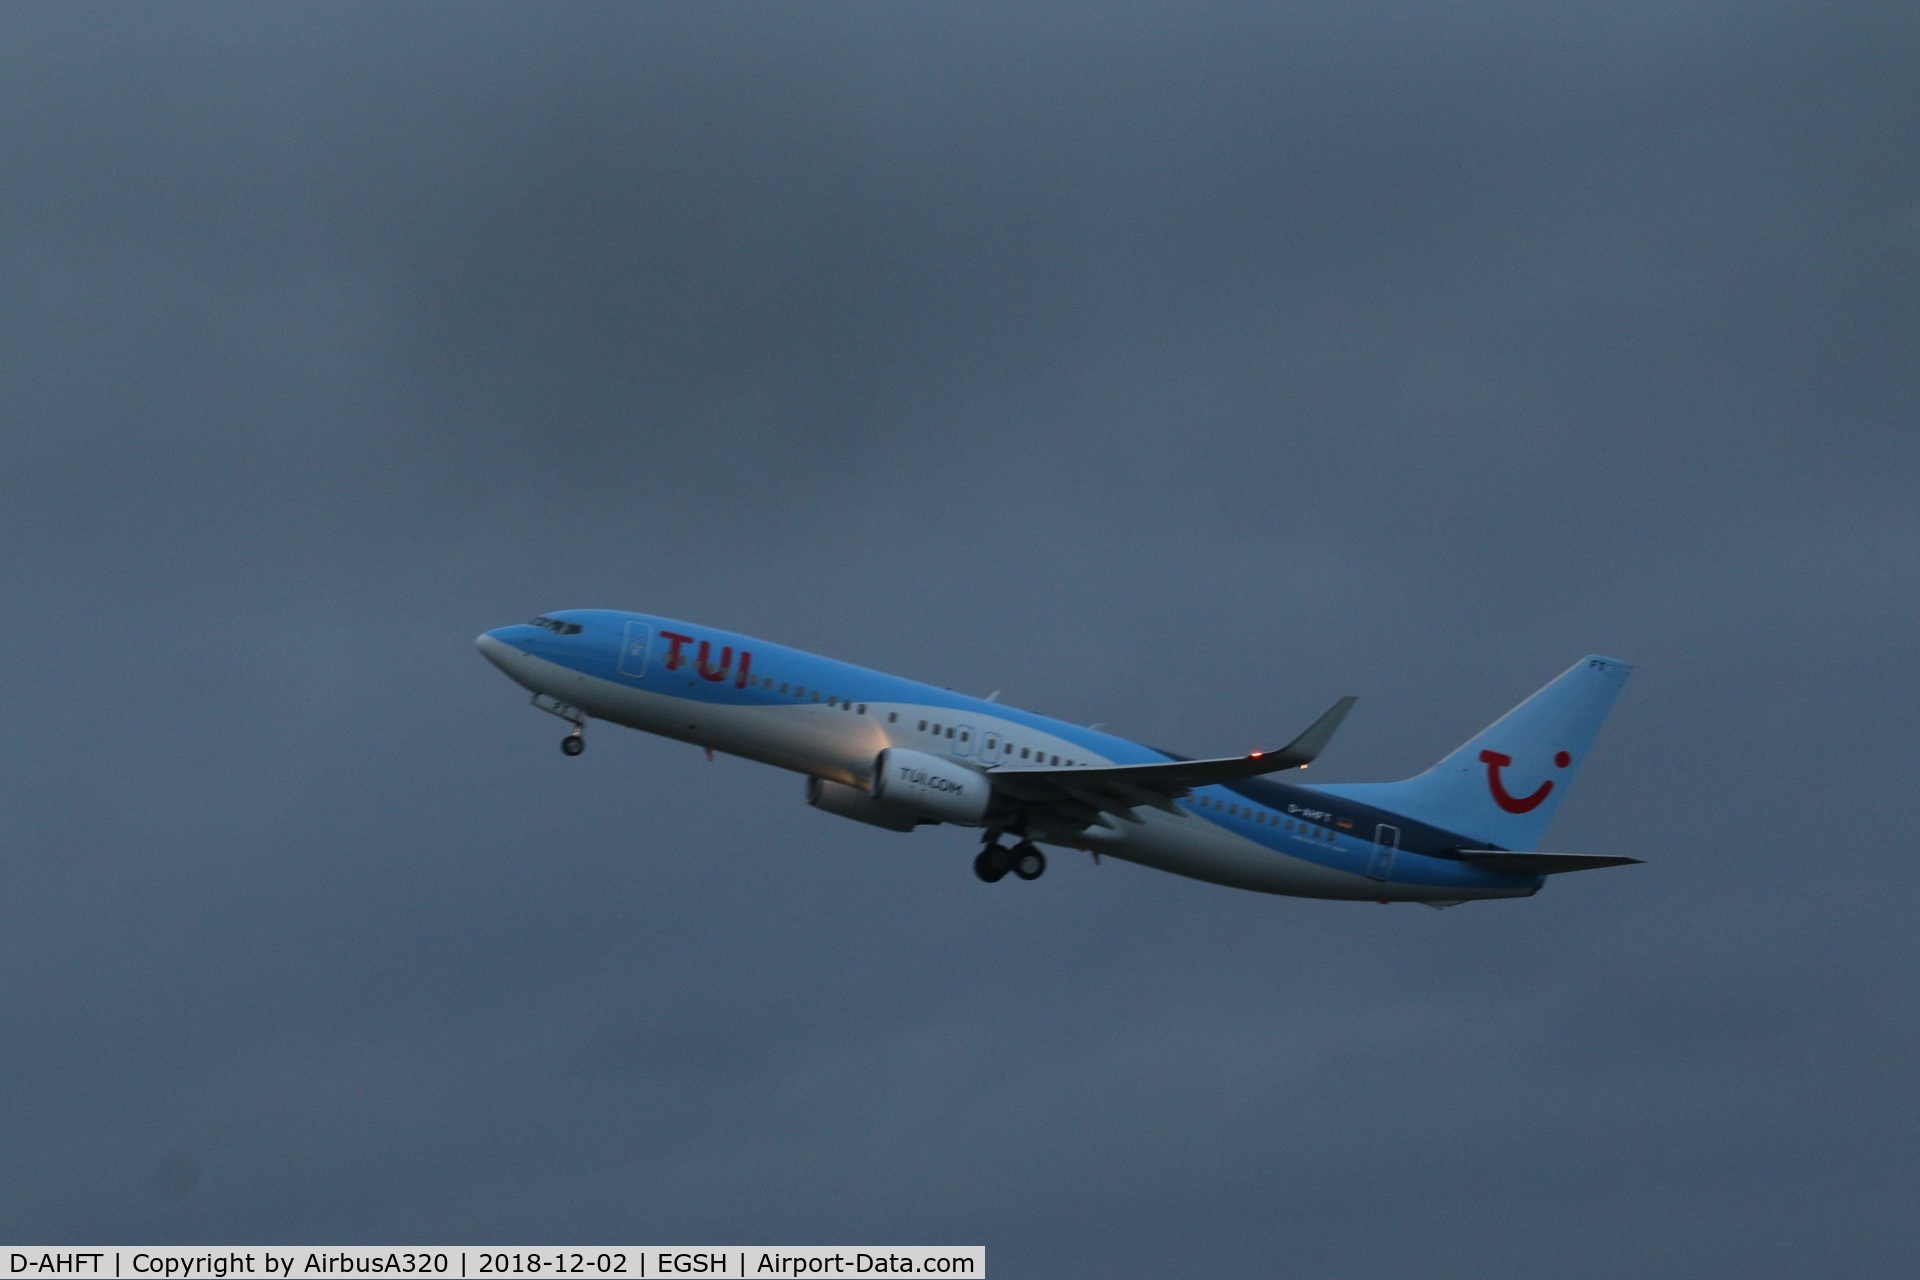 D-AHFT, 2000 Boeing 737-8K5 C/N 30413, Departing Norwich after repaint into TUI livery